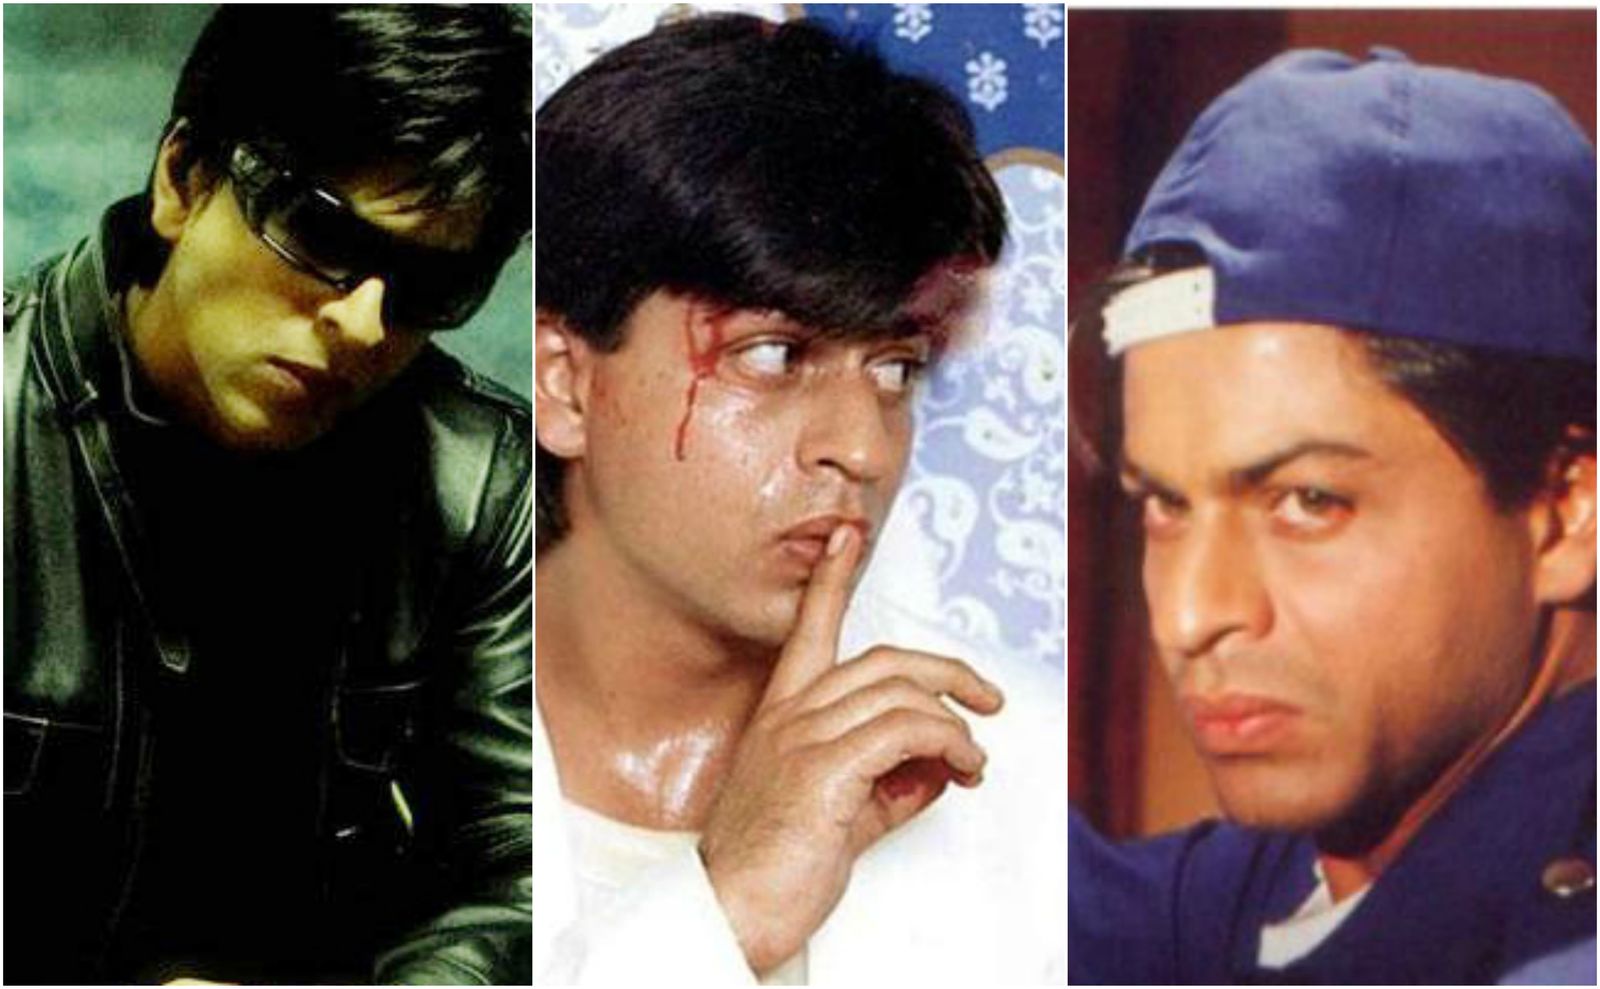 RANKED: Villainous Roles Of Shah Rukh Khan That Make Him The Superstar Of Darkness